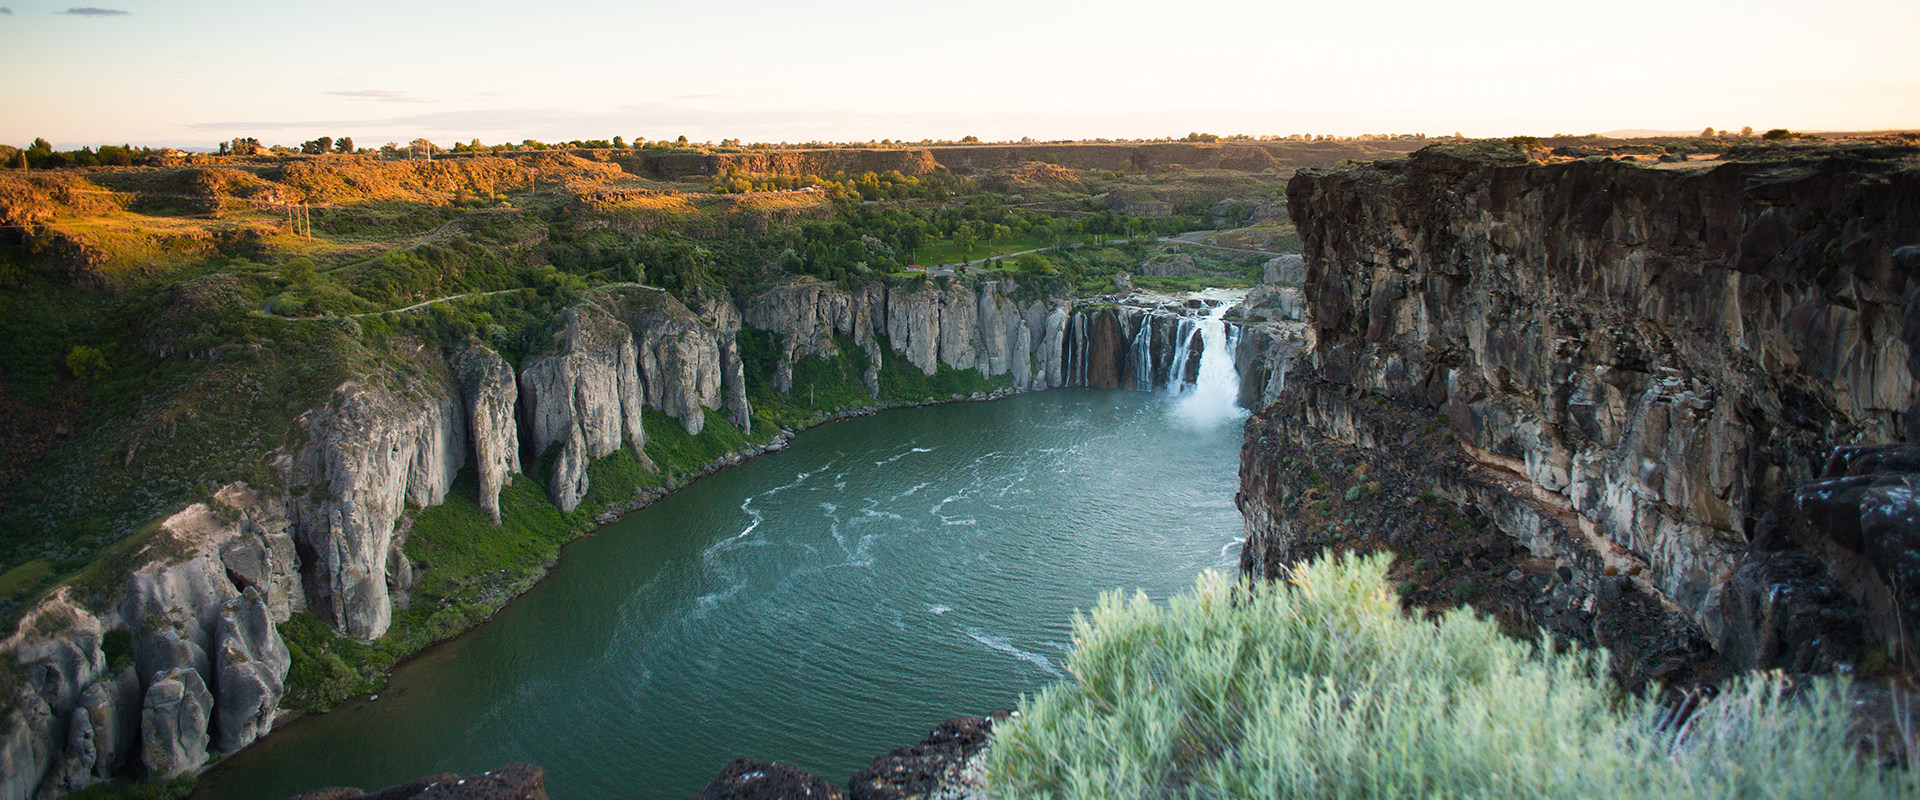 Harnessing Renewable Energy Sources in Post Falls, Idaho